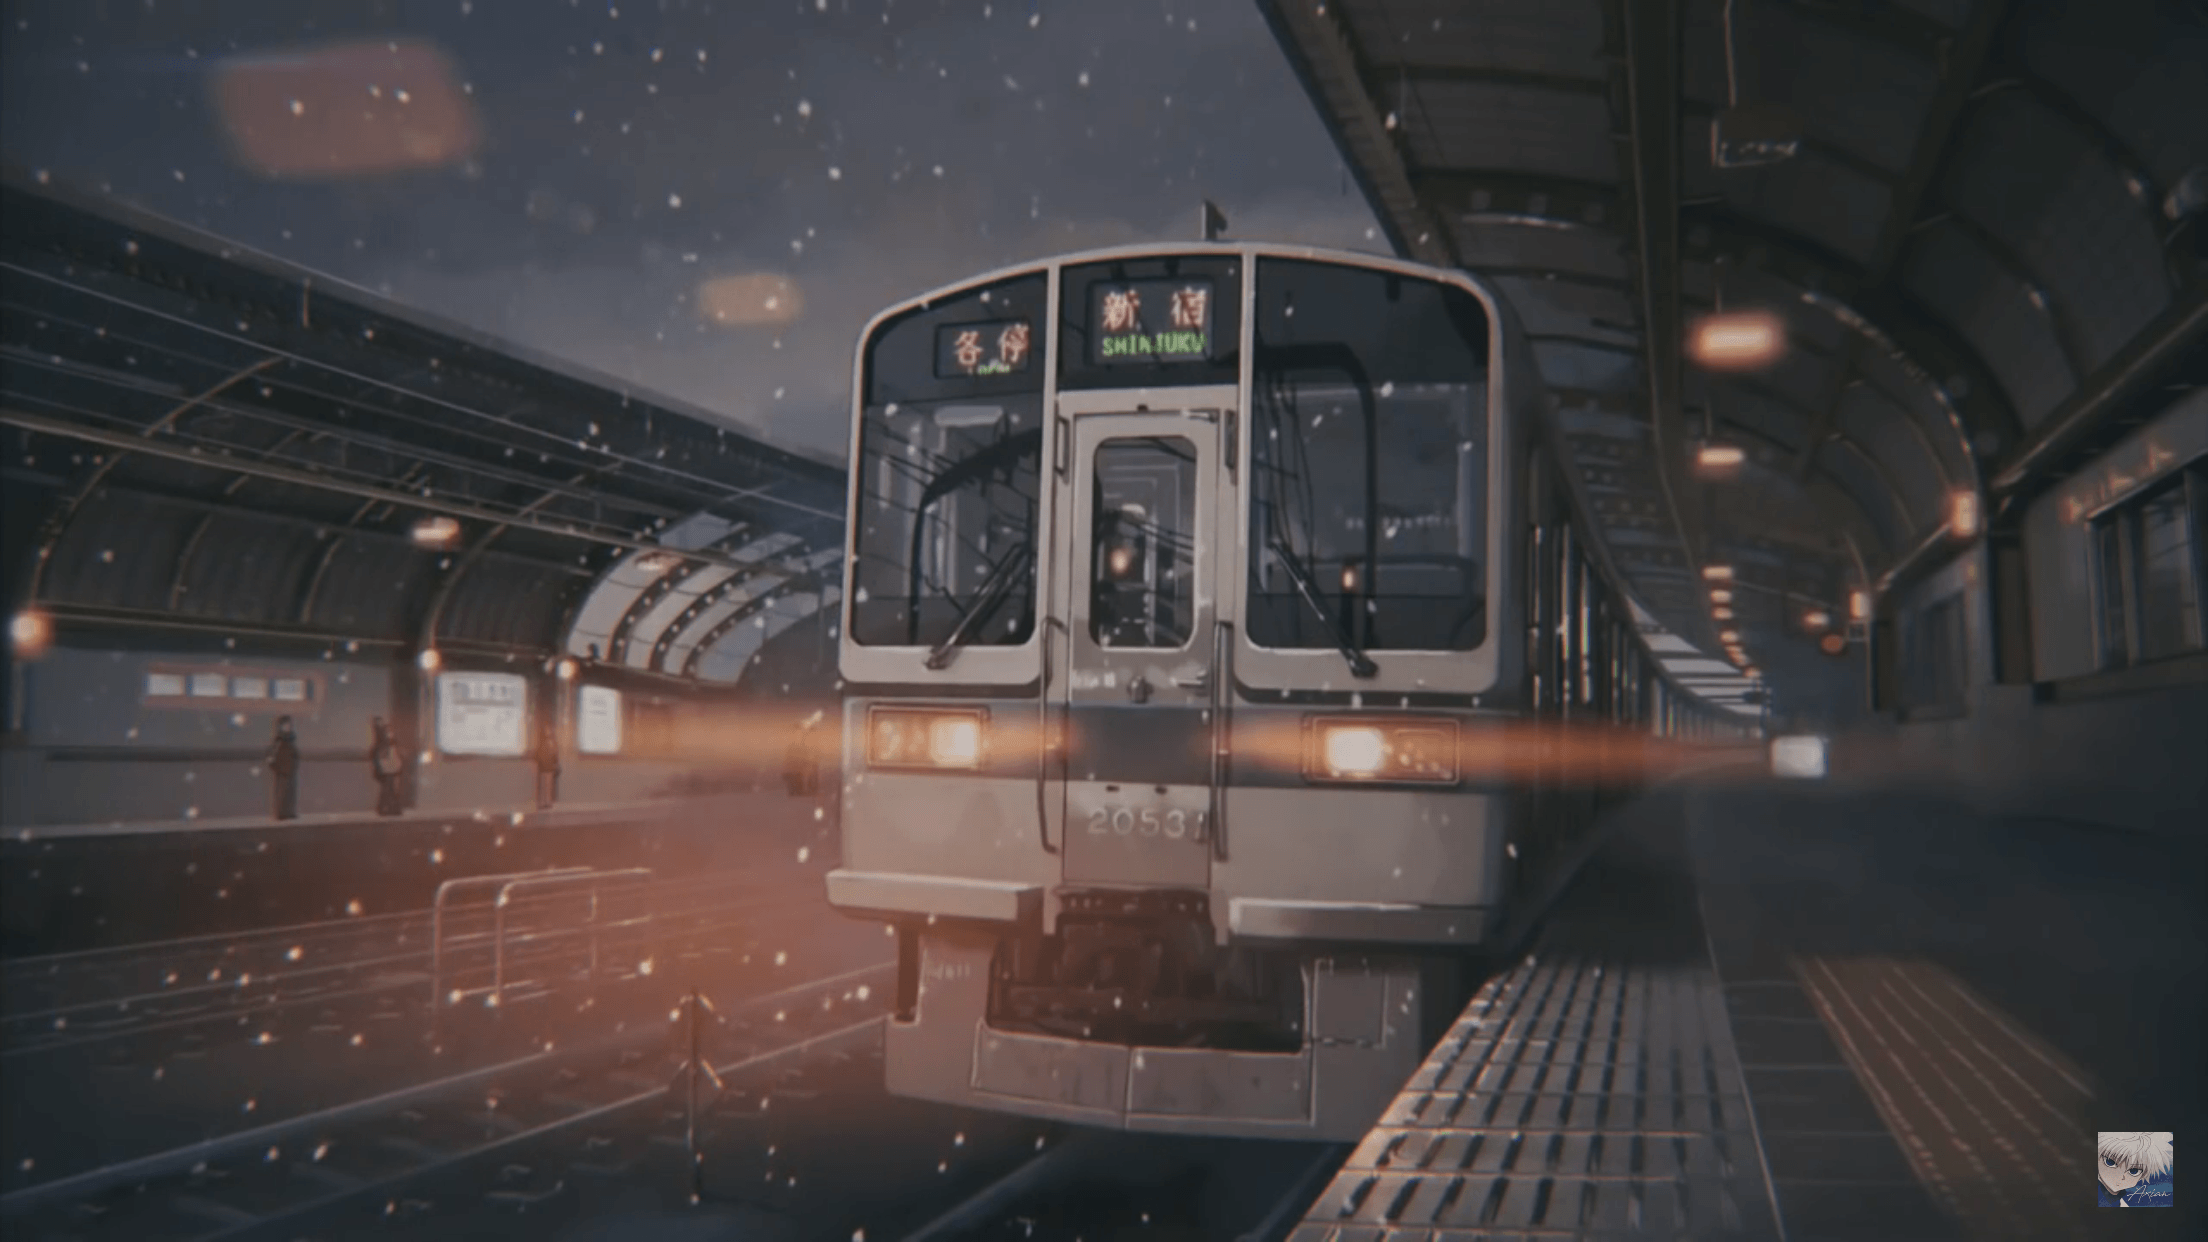 A train is coming into the station - Lo fi